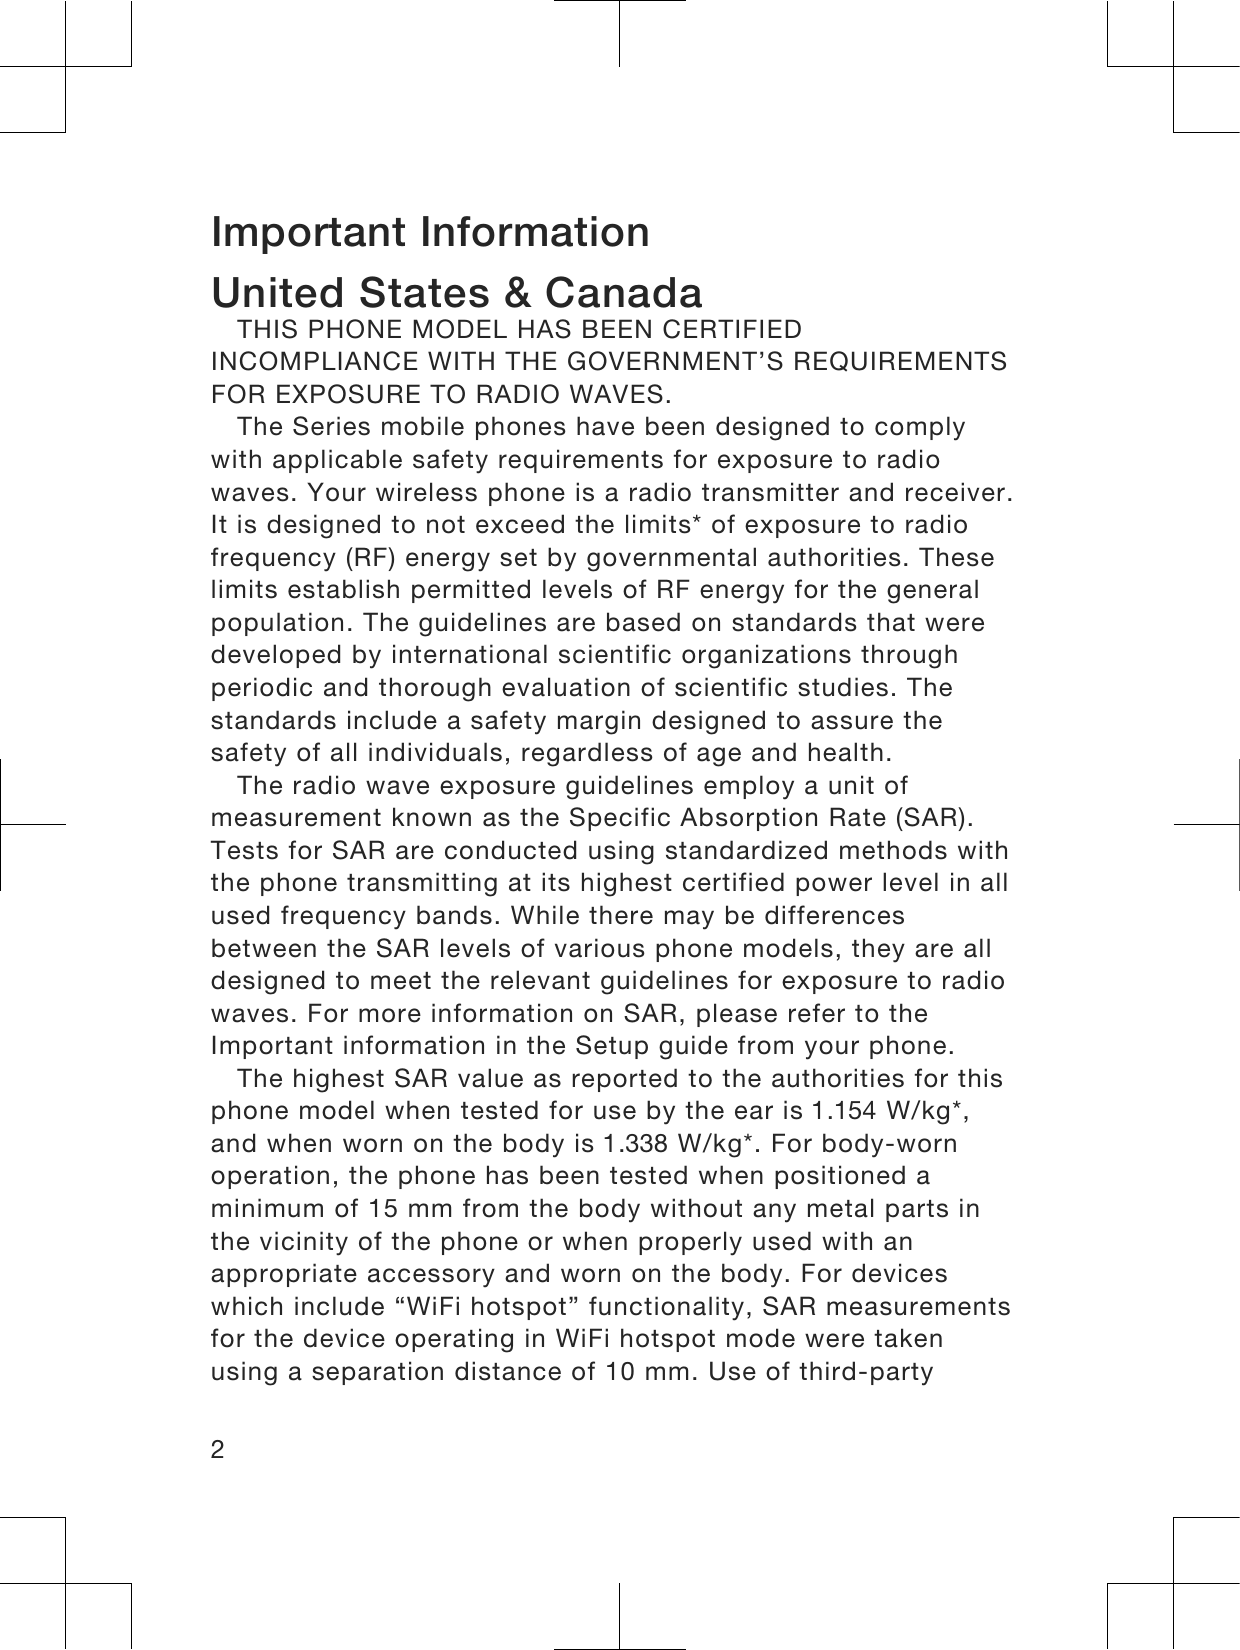 Important InformationUnited States &amp; CanadaTHIS PHONE MODEL HAS BEEN CERTIFIEDINCOMPLIANCE WITH THE GOVERNMENT’S REQUIREMENTSFOR EXPOSURE TO RADIO WAVES.The Series mobile phones have been designed to complywith applicable safety requirements for exposure to radiowaves. Your wireless phone is a radio transmitter and receiver.It is designed to not exceed the limits* of exposure to radiofrequency (RF) energy set by governmental authorities. Theselimits establish permitted levels of RF energy for the generalpopulation. The guidelines are based on standards that weredeveloped by international scientific organizations throughperiodic and thorough evaluation of scientific studies. Thestandards include a safety margin designed to assure thesafety of all individuals, regardless of age and health.The radio wave exposure guidelines employ a unit ofmeasurement known as the Specific Absorption Rate (SAR).Tests for SAR are conducted using standardized methods withthe phone transmitting at its highest certified power level in allused frequency bands. While there may be differencesbetween the SAR levels of various phone models, they are alldesigned to meet the relevant guidelines for exposure to radiowaves. For more information on SAR, please refer to theImportant information in the Setup guide from your phone.The highest SAR value as reported to the authorities for thisphone model when tested for use by the ear is 1.154 W/kg*,and when worn on the body is 1.338 W/kg*. For body-wornoperation, the phone has been tested when positioned aminimum of 15 mm from the body without any metal parts inthe vicinity of the phone or when properly used with anappropriate accessory and worn on the body. For deviceswhich include “WiFi hotspot” functionality, SAR measurementsfor the device operating in WiFi hotspot mode were takenusing a separation distance of 10 mm. Use of third-party2